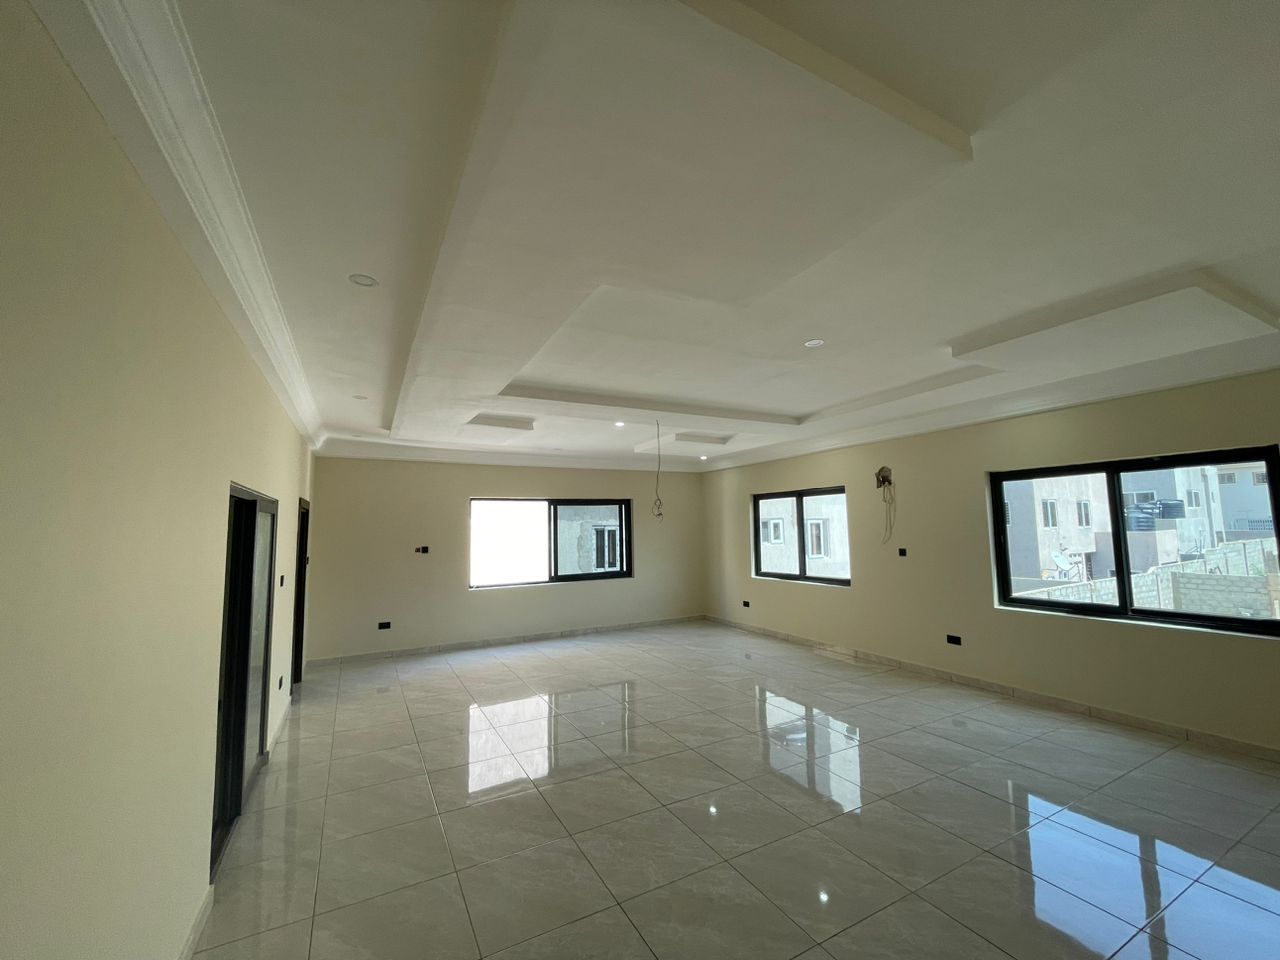 Five (5) Bedroom House With One (1) Boys for Sale at East Airport Hills (Newly Built)